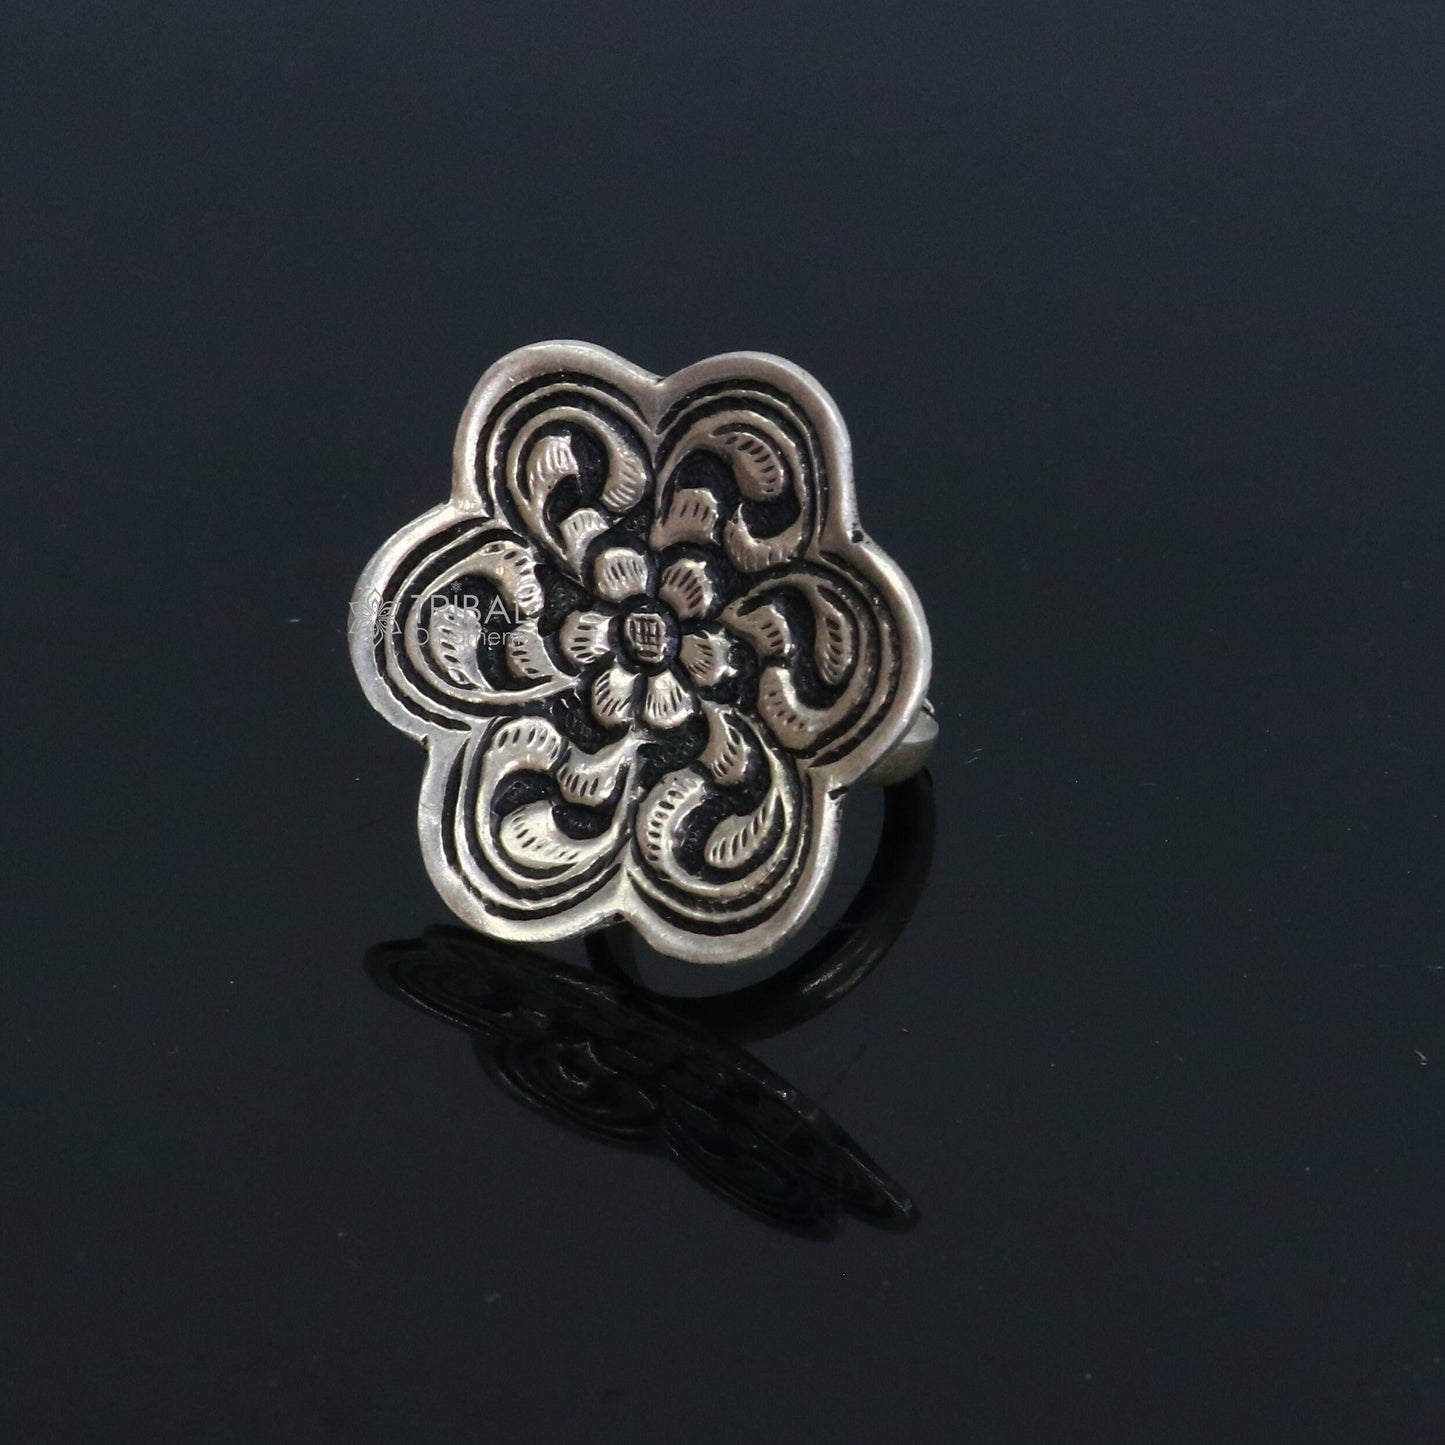 Traditional cultural flower design 925 sterling silver adjustable ring, best tribal ethnic jewelry for belly dance Navratri jewelry sr385 - TRIBAL ORNAMENTS